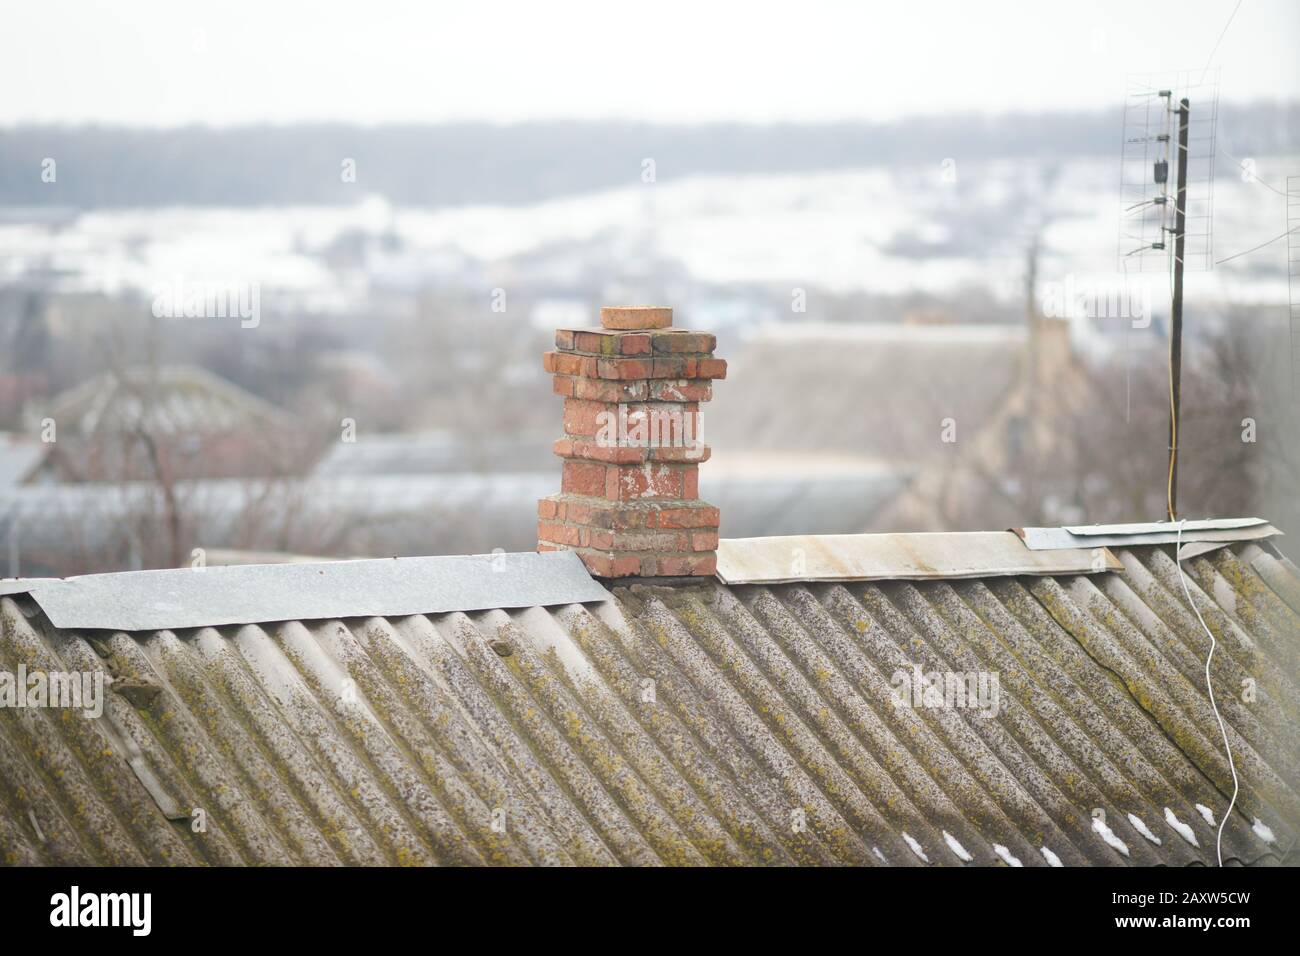 Chimney in red bricks on the old rural roof Stock Photo